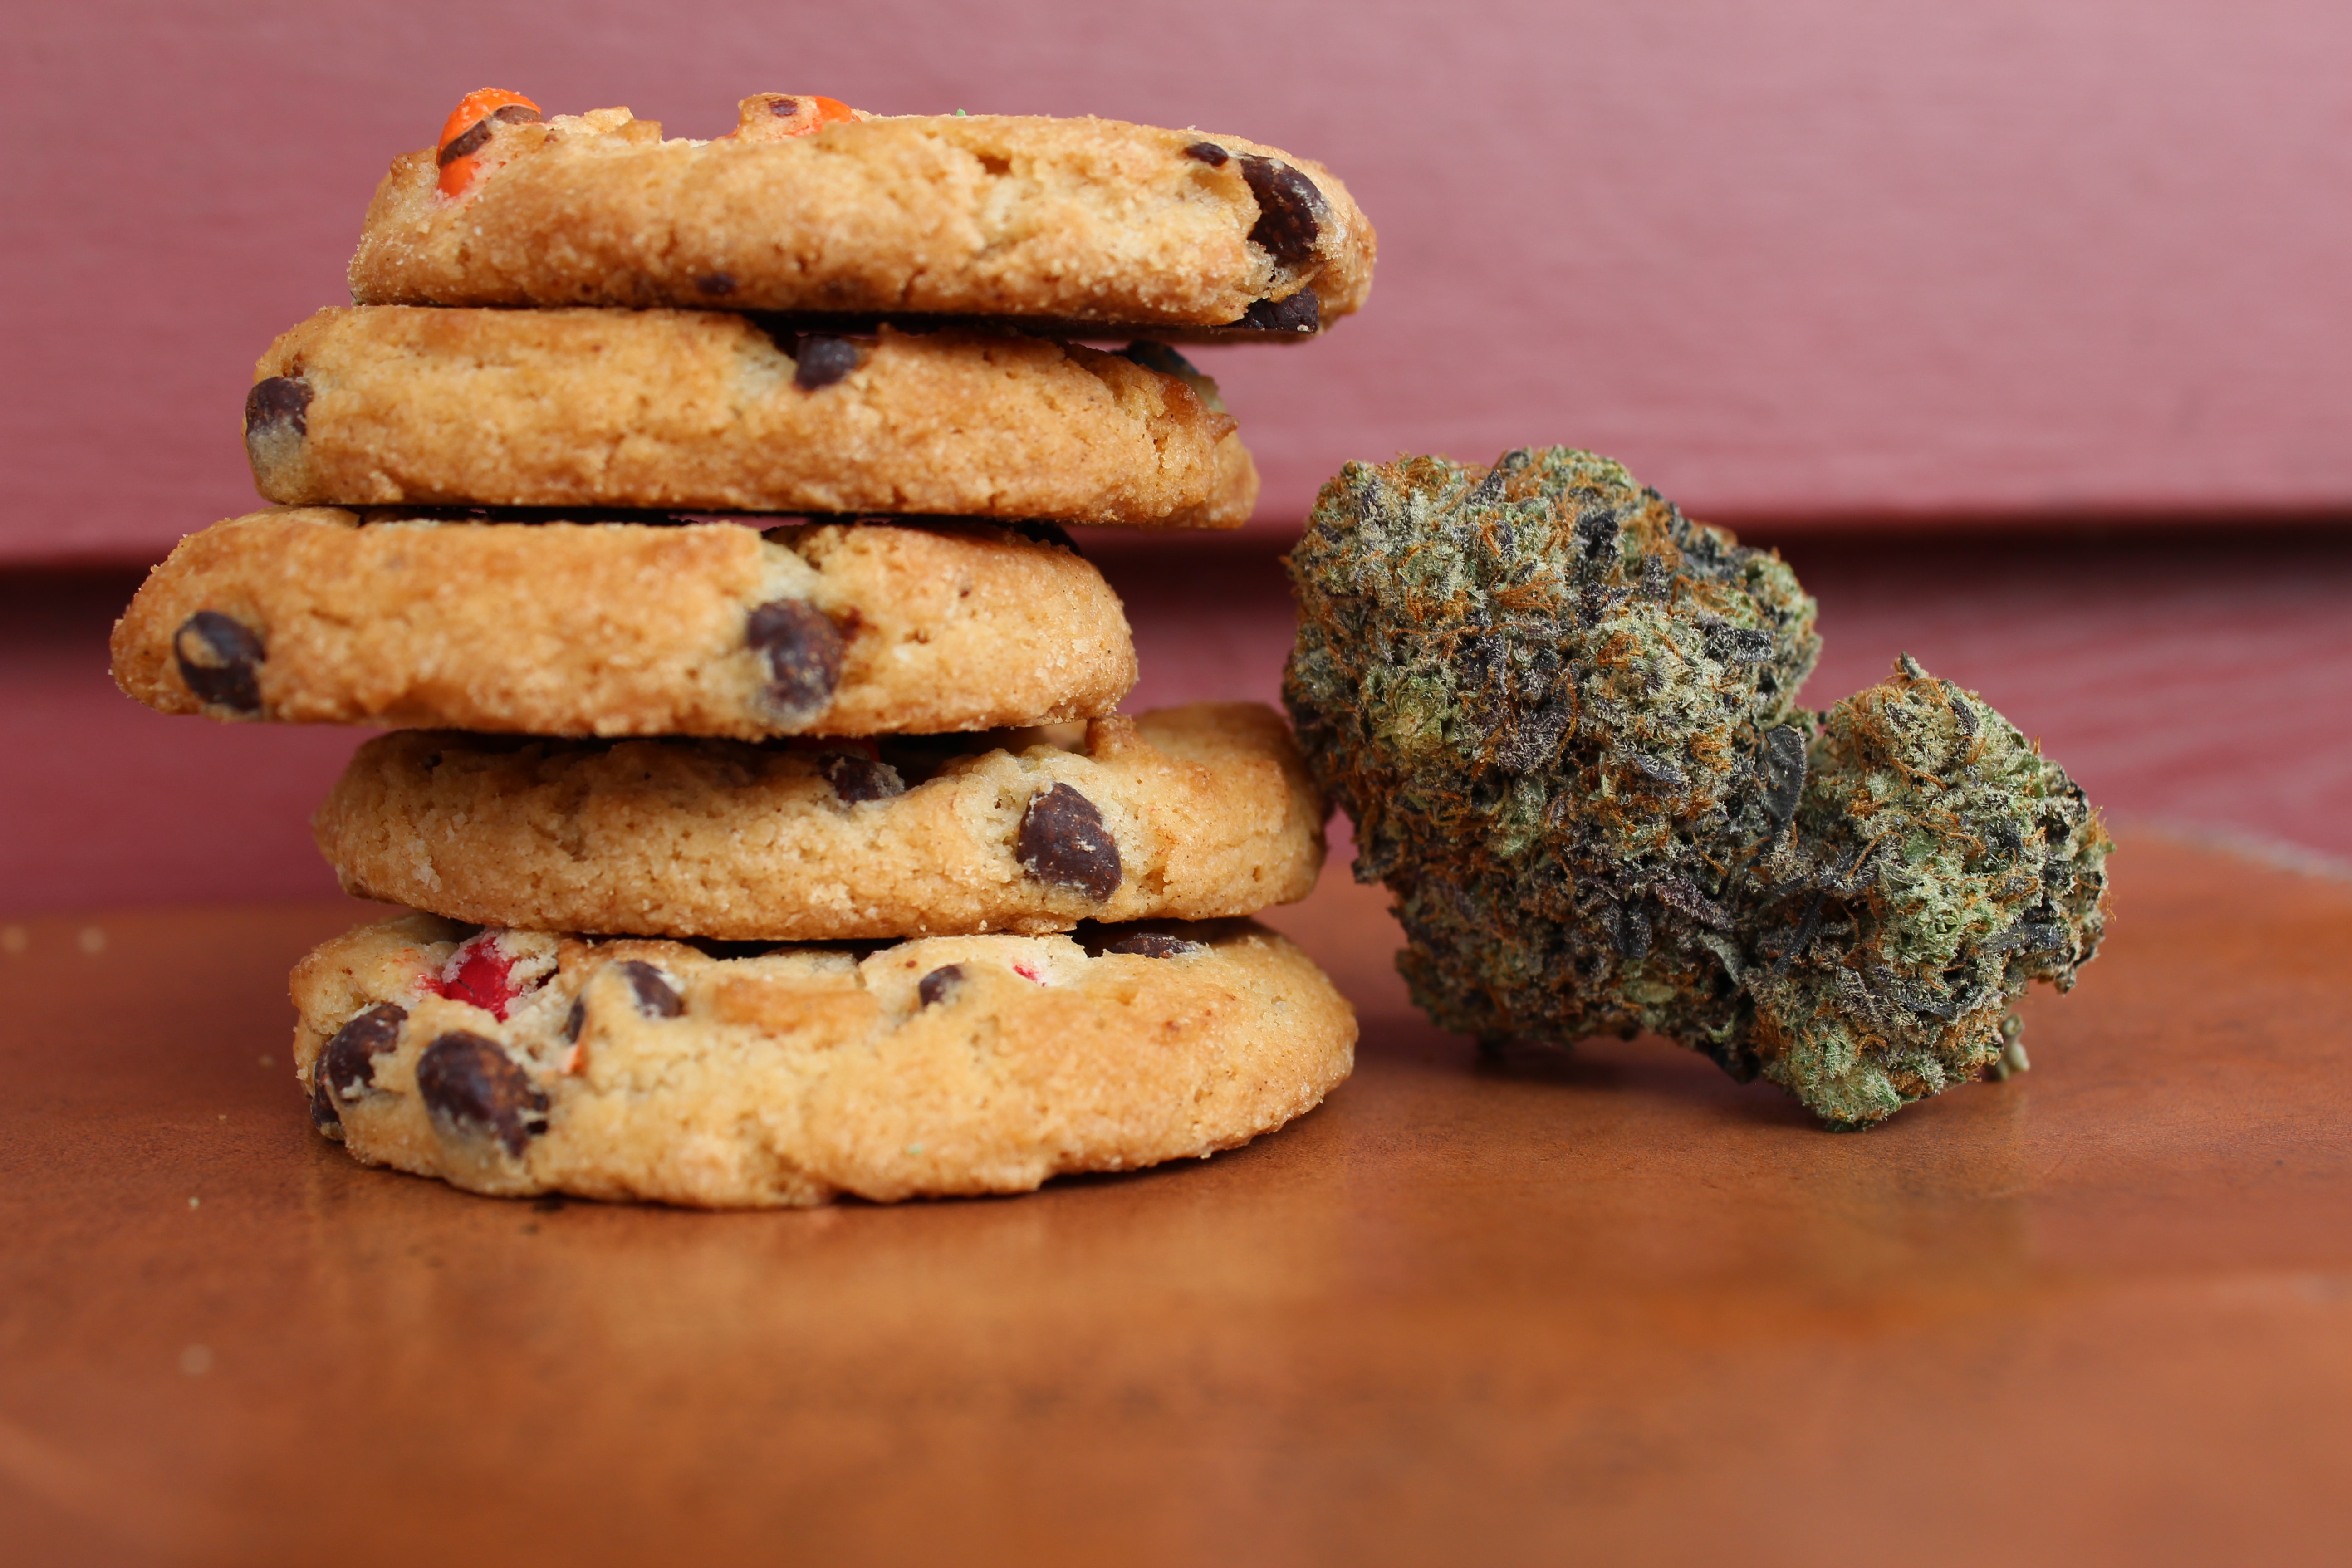 How to use medical cannabis in edibles